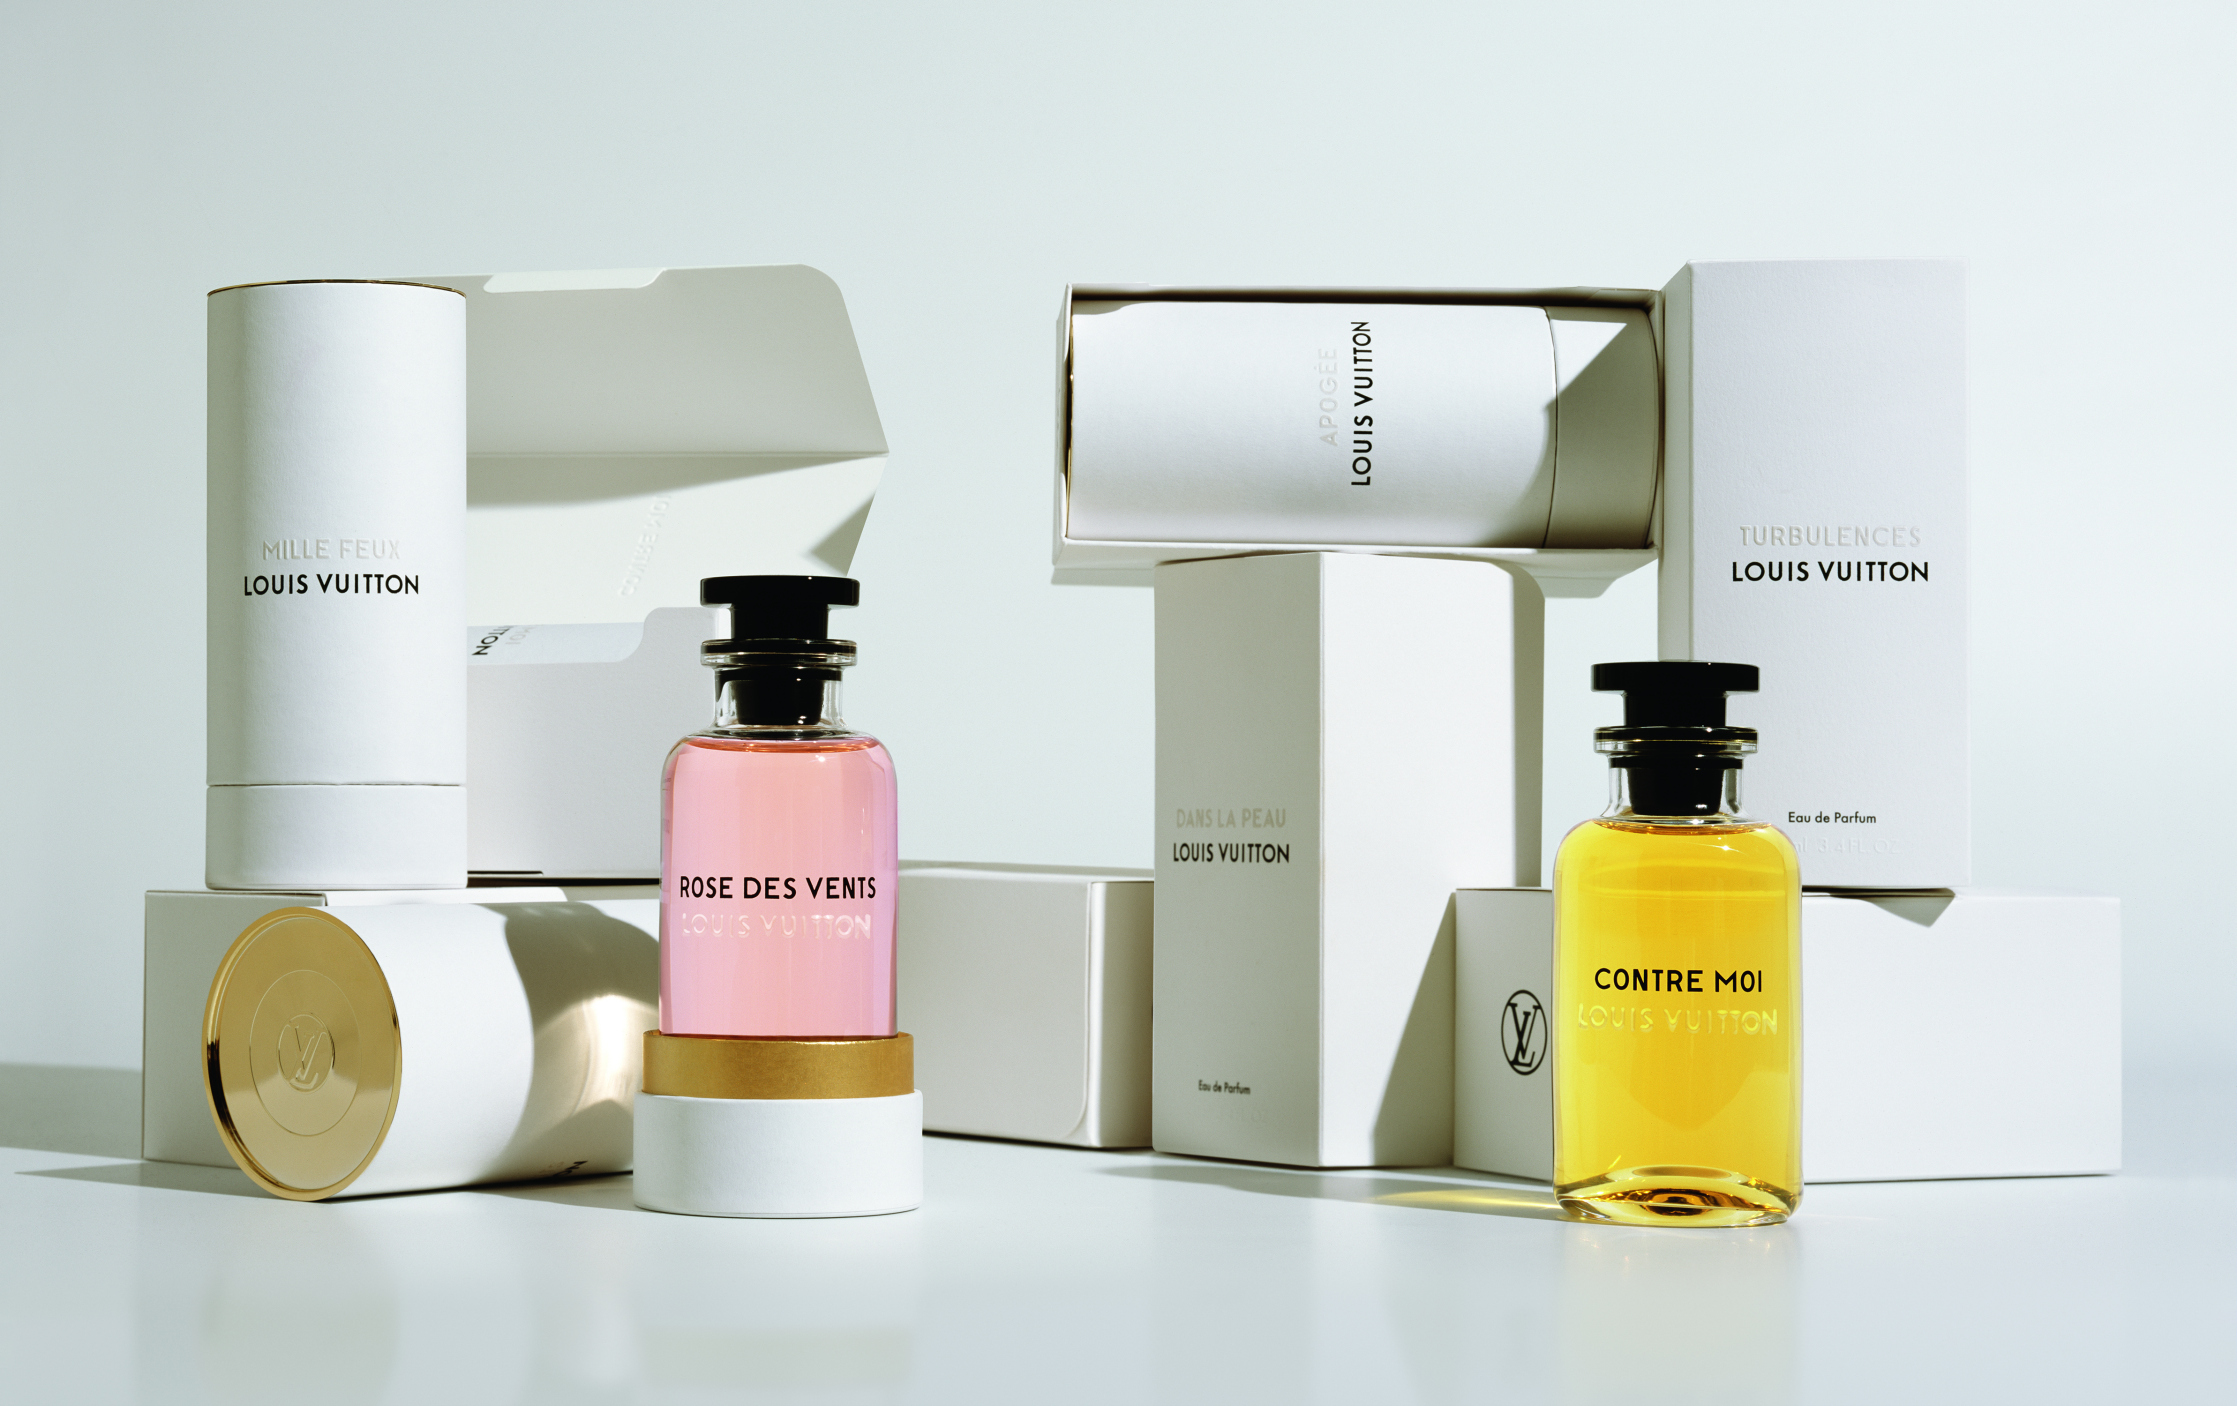 Louis Vuitton Opens Their Doors To The World Of Fragrance